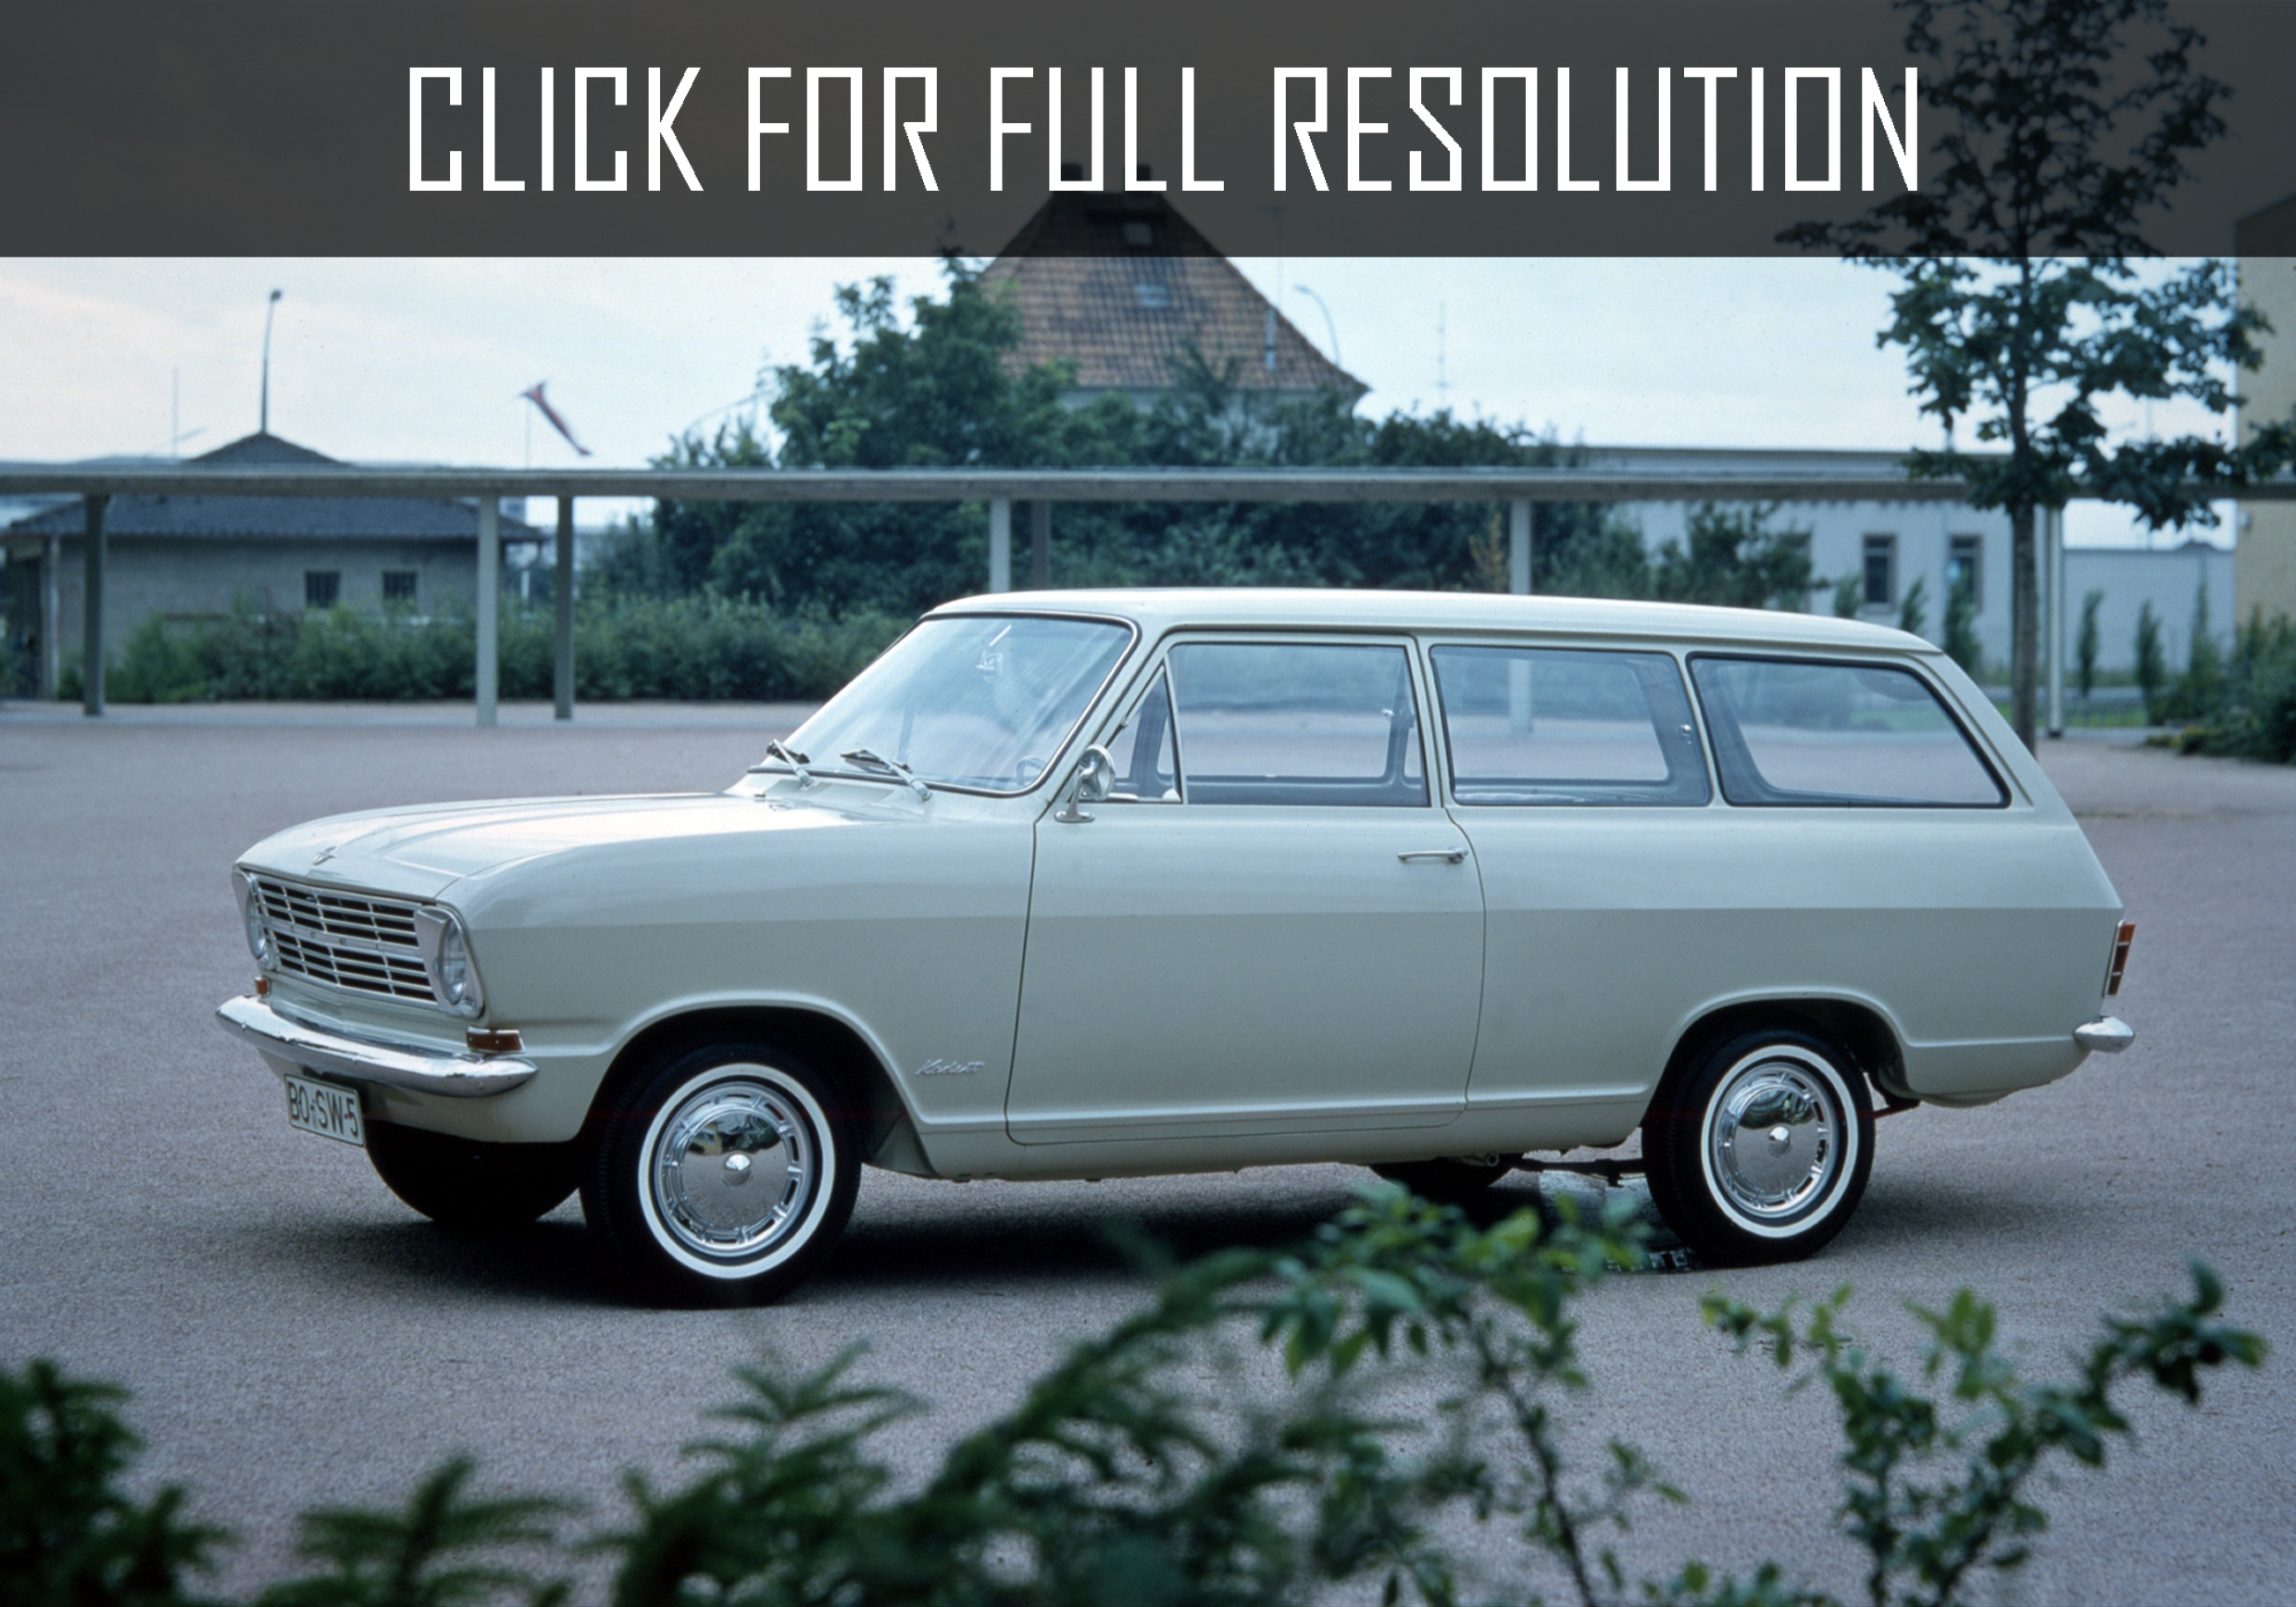 Opel Station Wagon amazing photo gallery, some information and